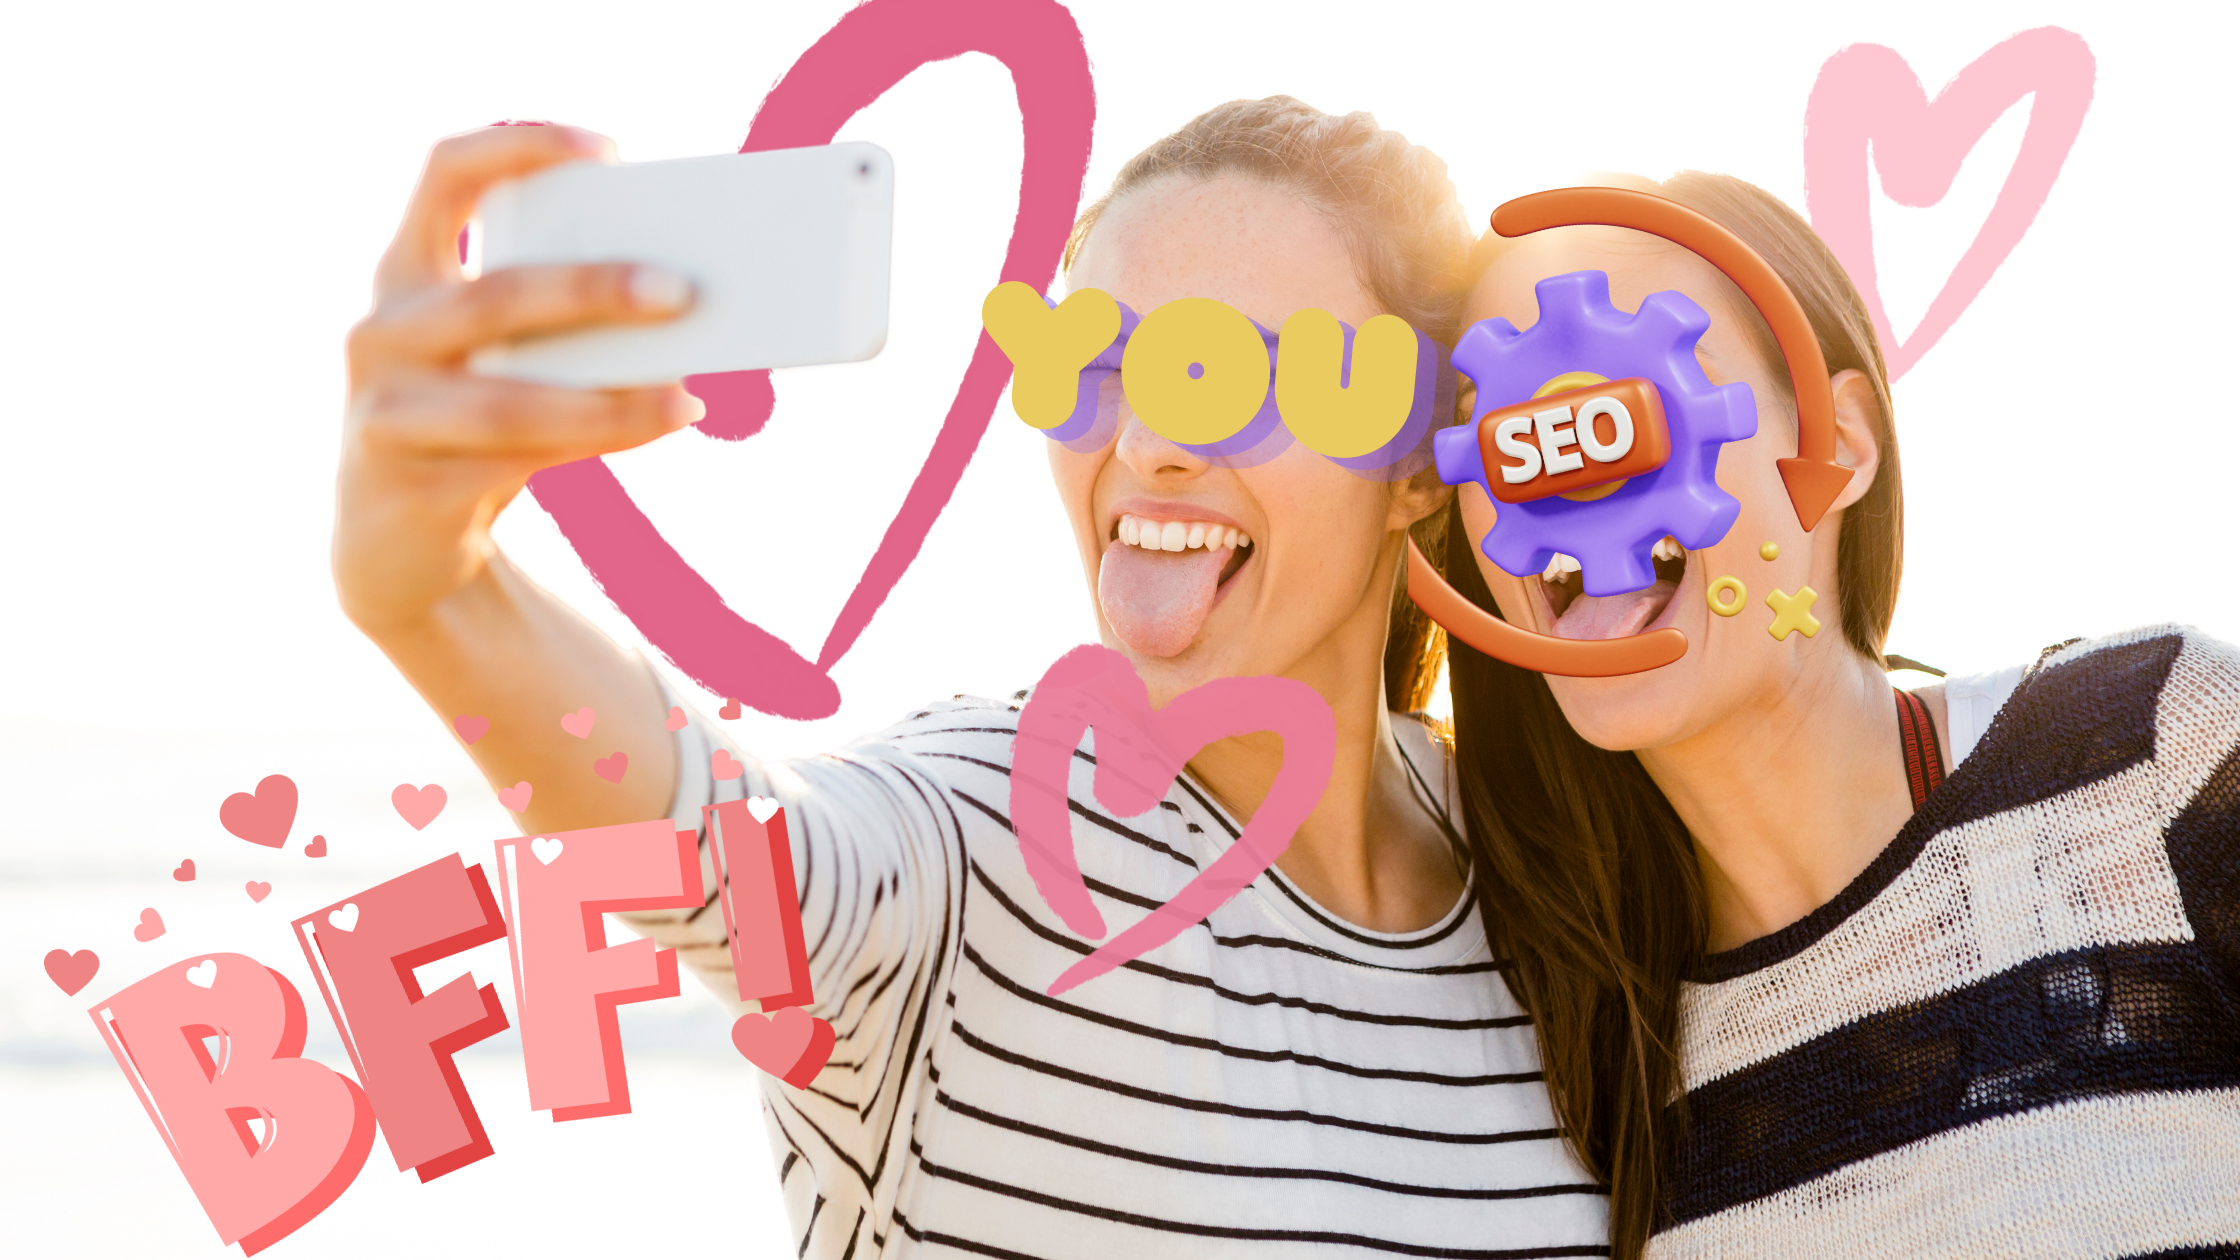 seo is your new best friend